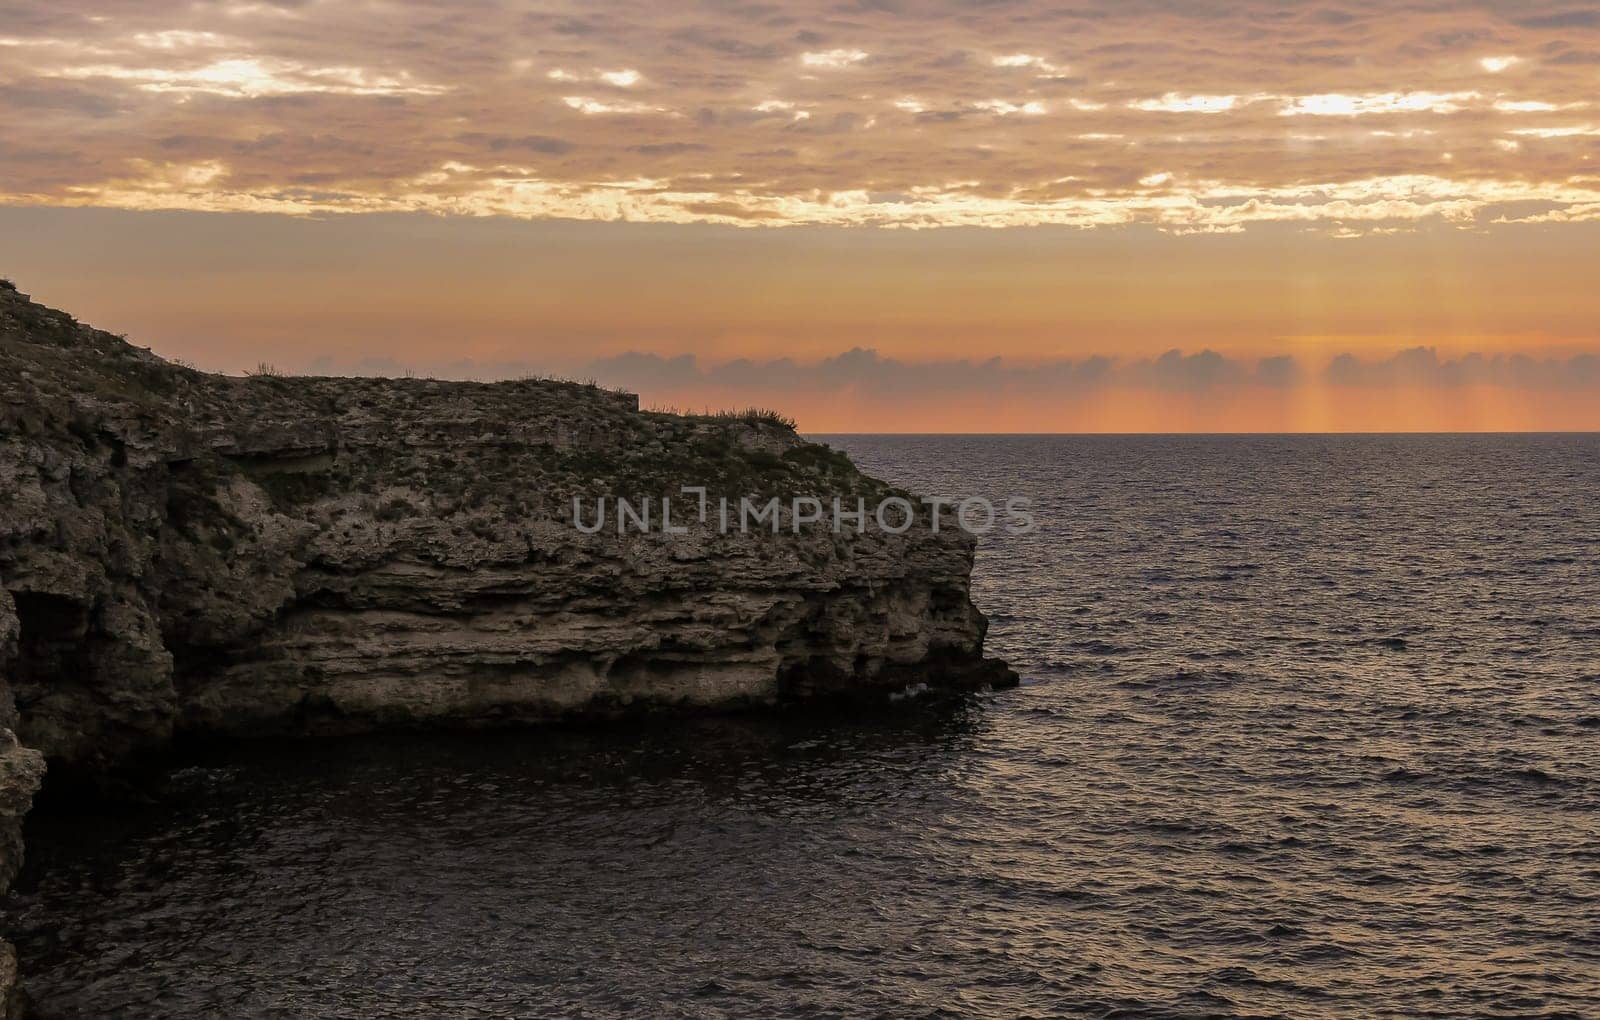 Beautiful Sunset in the clouds over the Black Sea in eastern Crimea